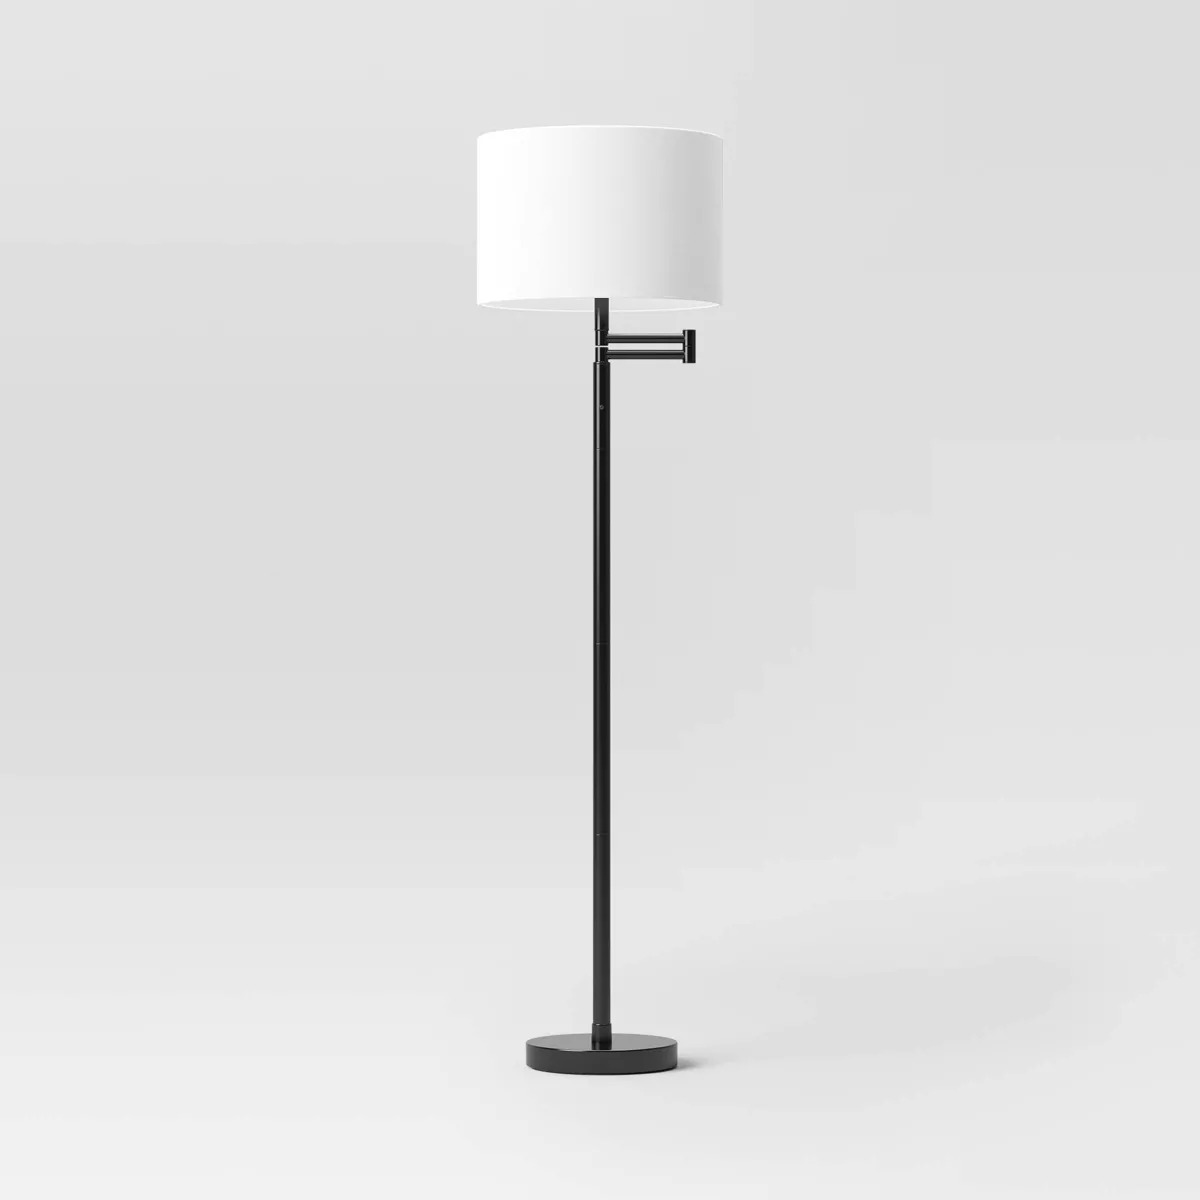 63" Threshold Metal Swing Arm Floor Lamp (Black/White; Bulb Not Included) $17.60 + Free Shipping